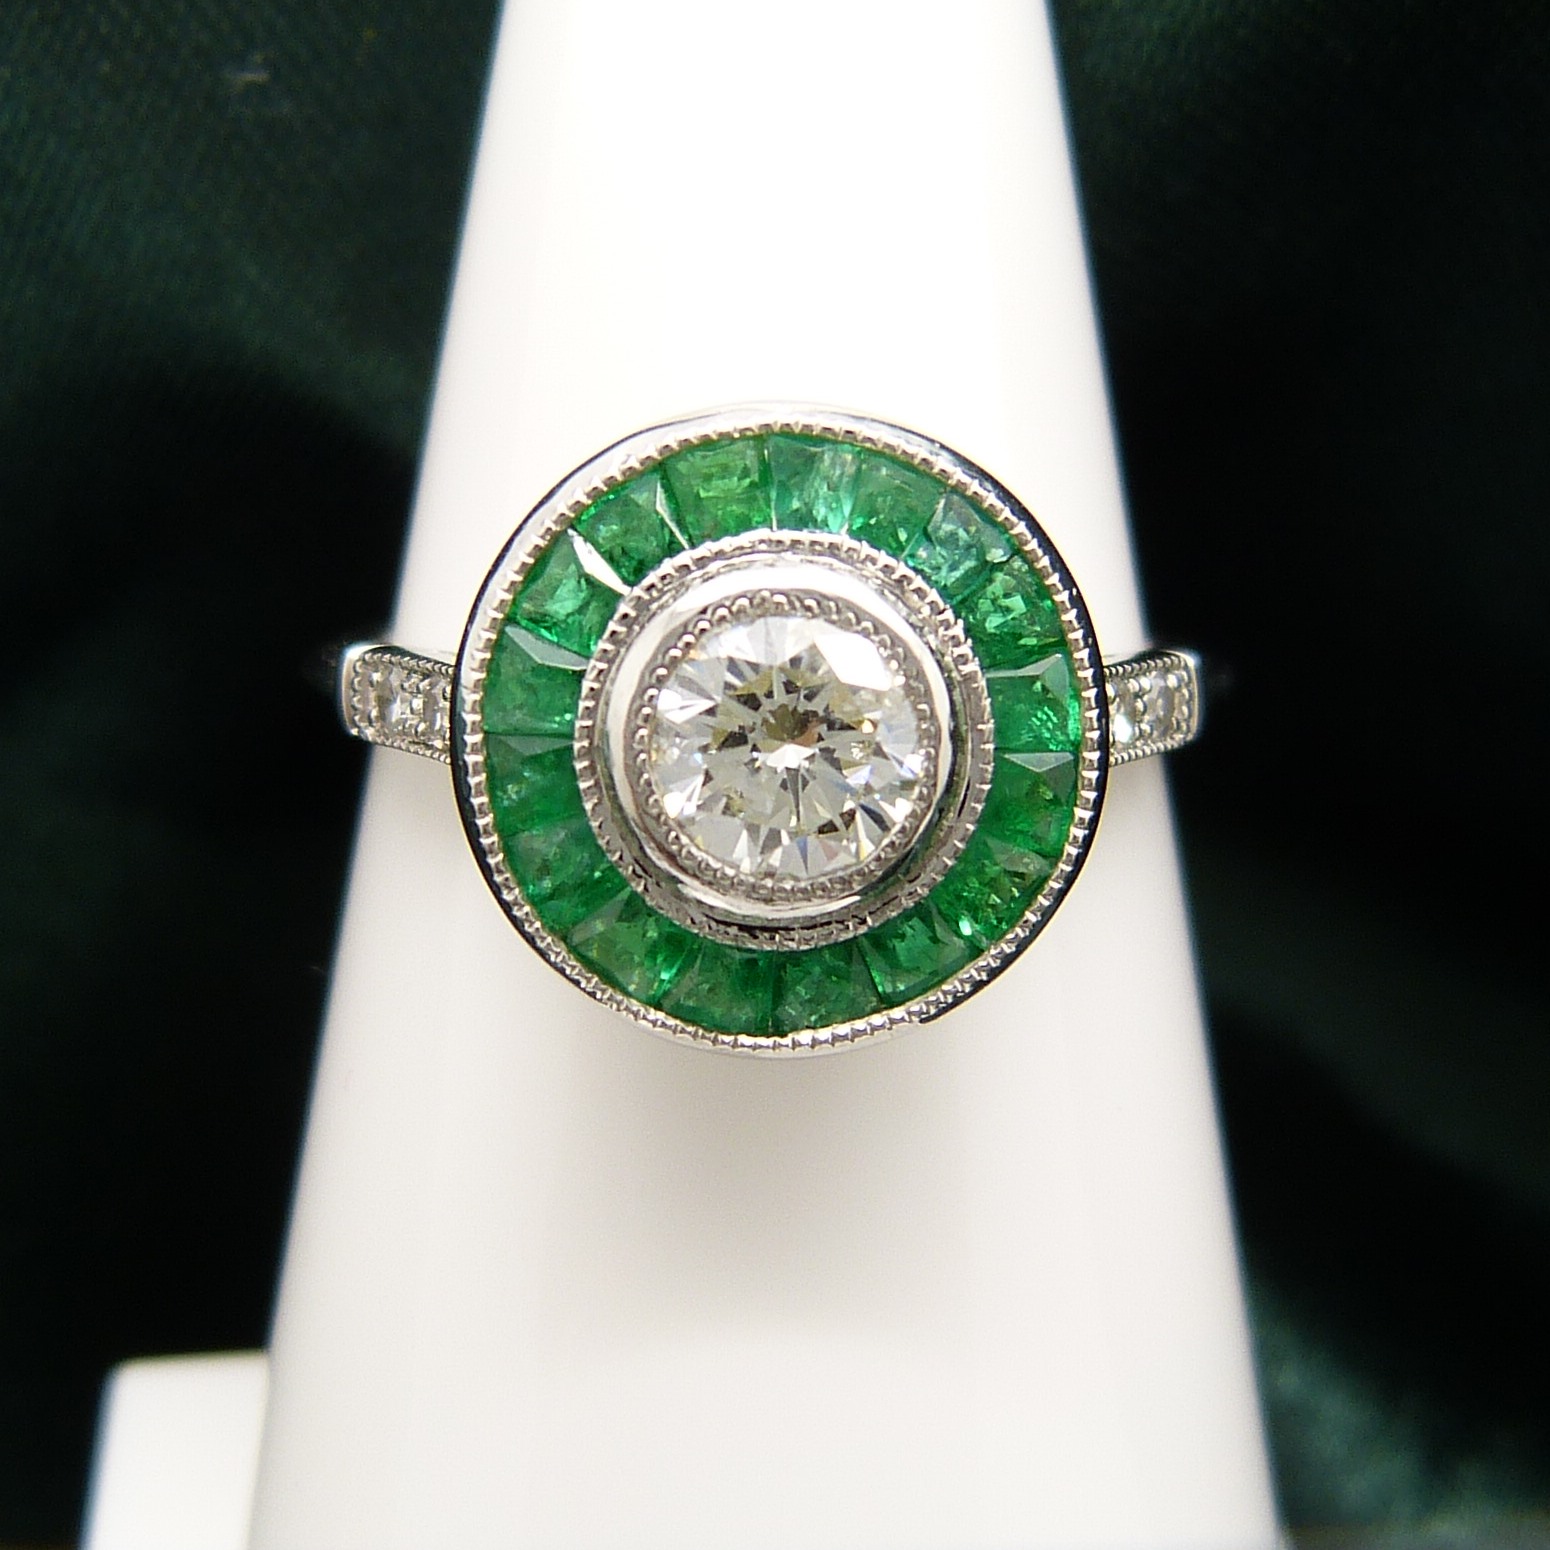 A target-style ring set with round brilliant-cut diamonds and emeralds, platinum - Image 2 of 6